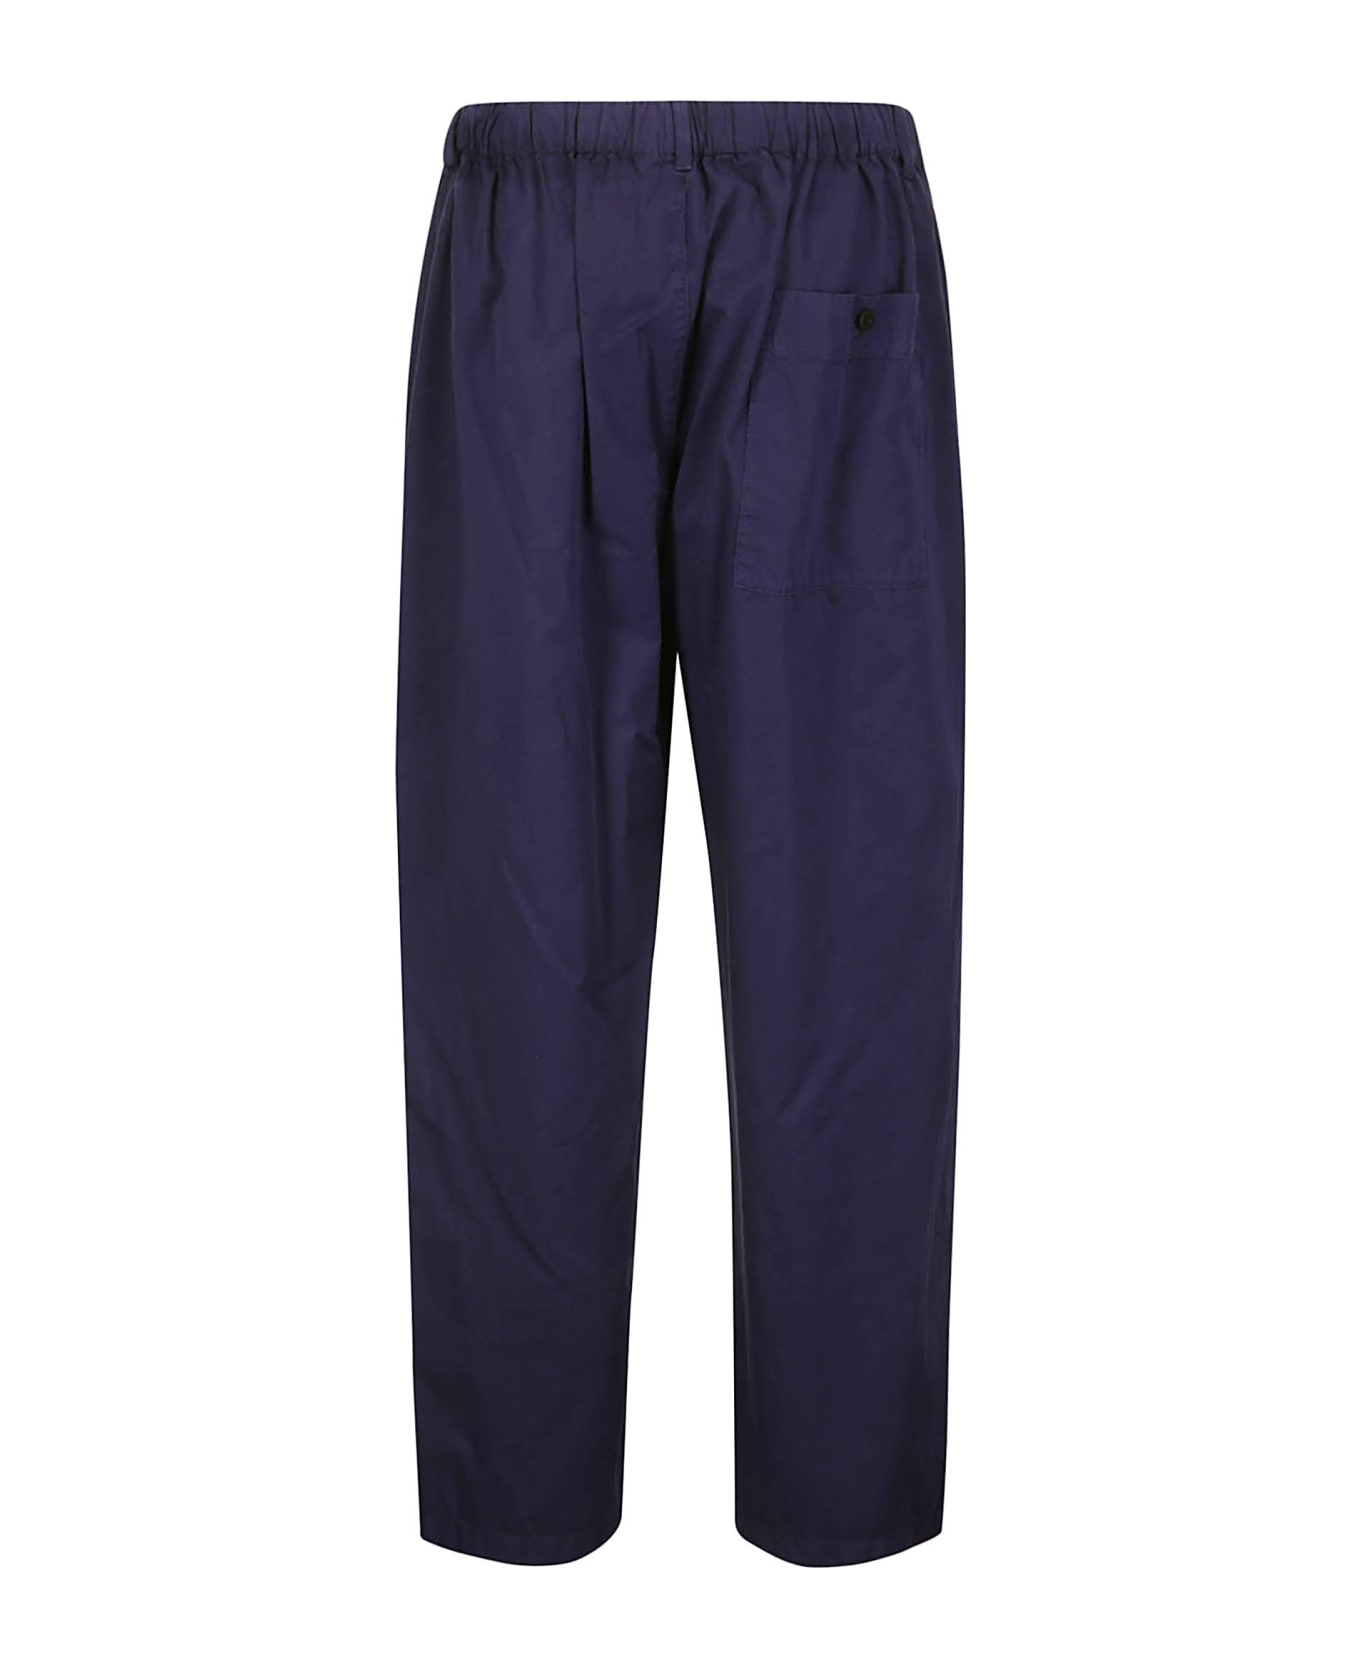 Lemaire Relaxed Pants - BLUE VIOLET ボトムス